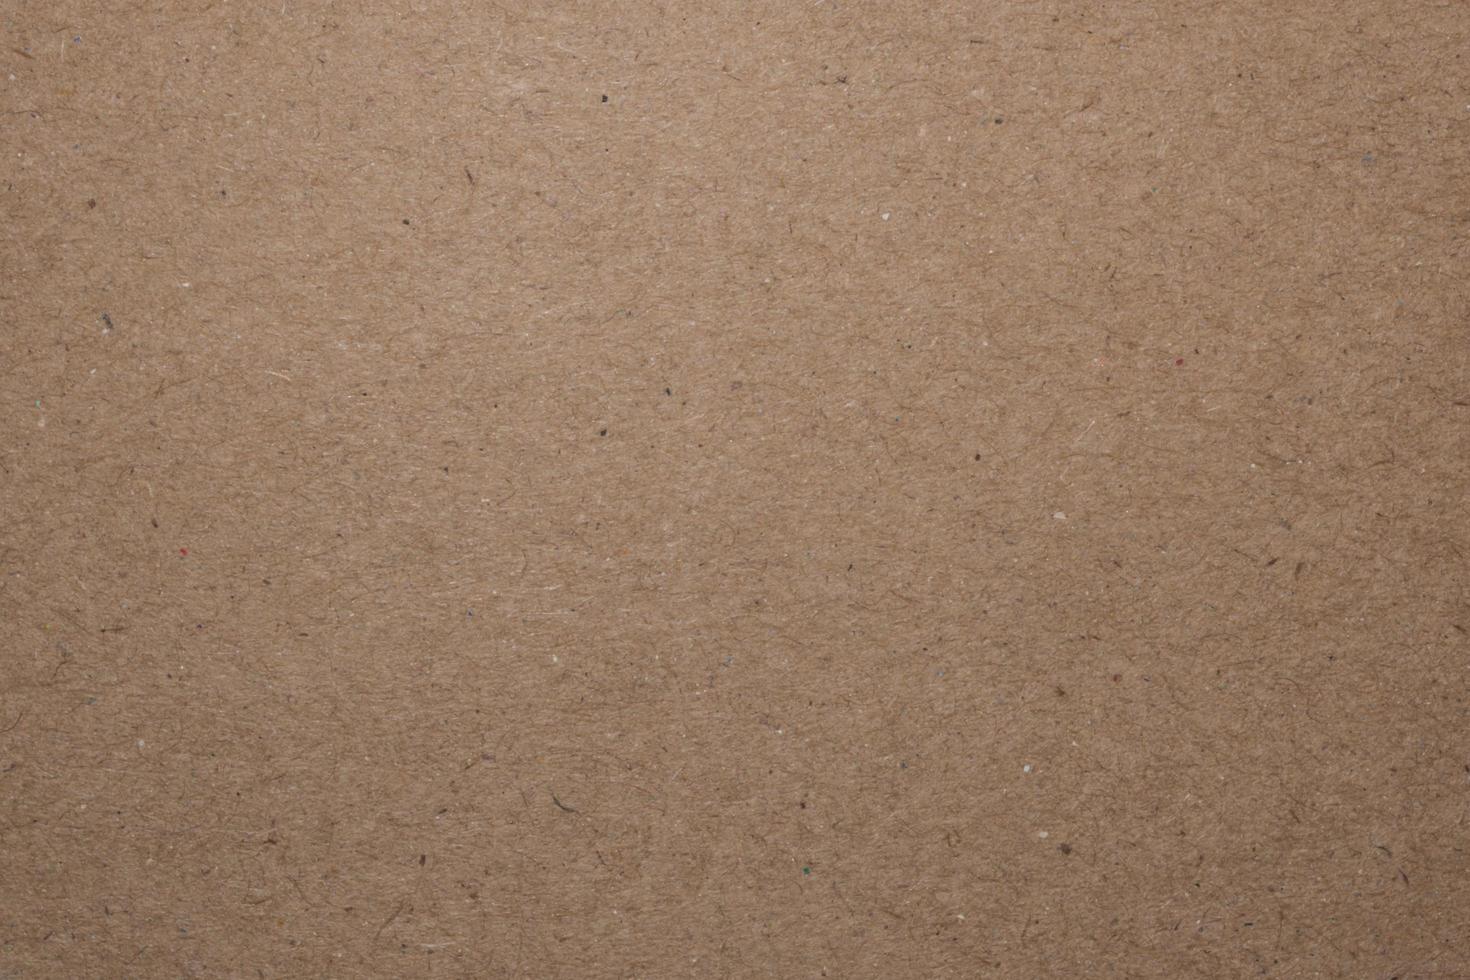 Brown Paper background photo